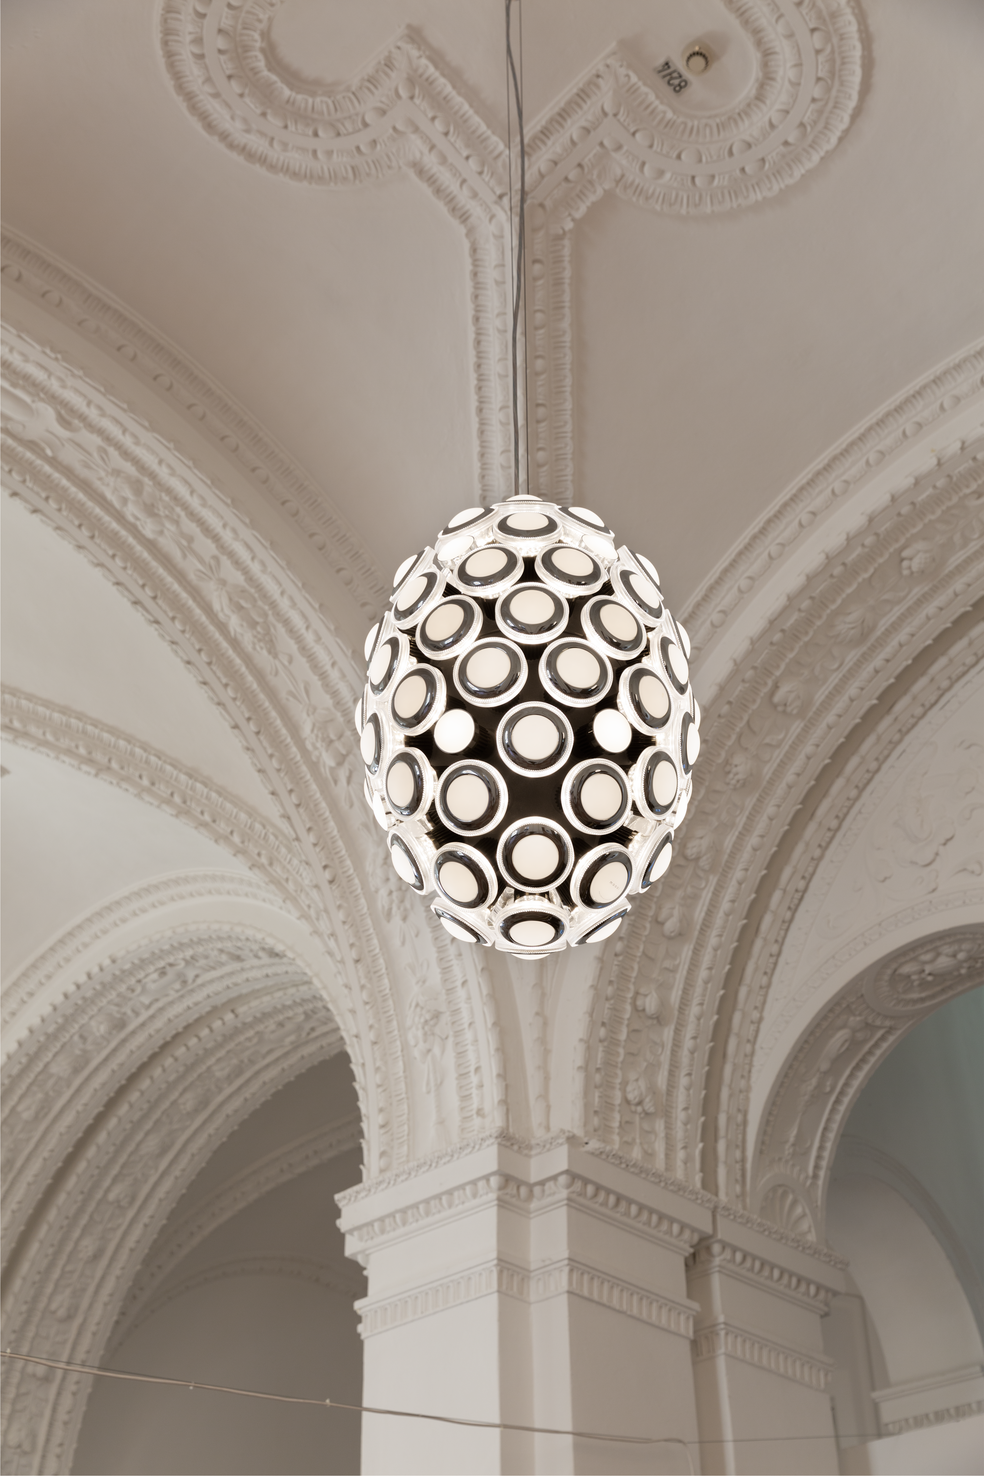 Iconic Eyes suspension light in Bavarian National Museum 11